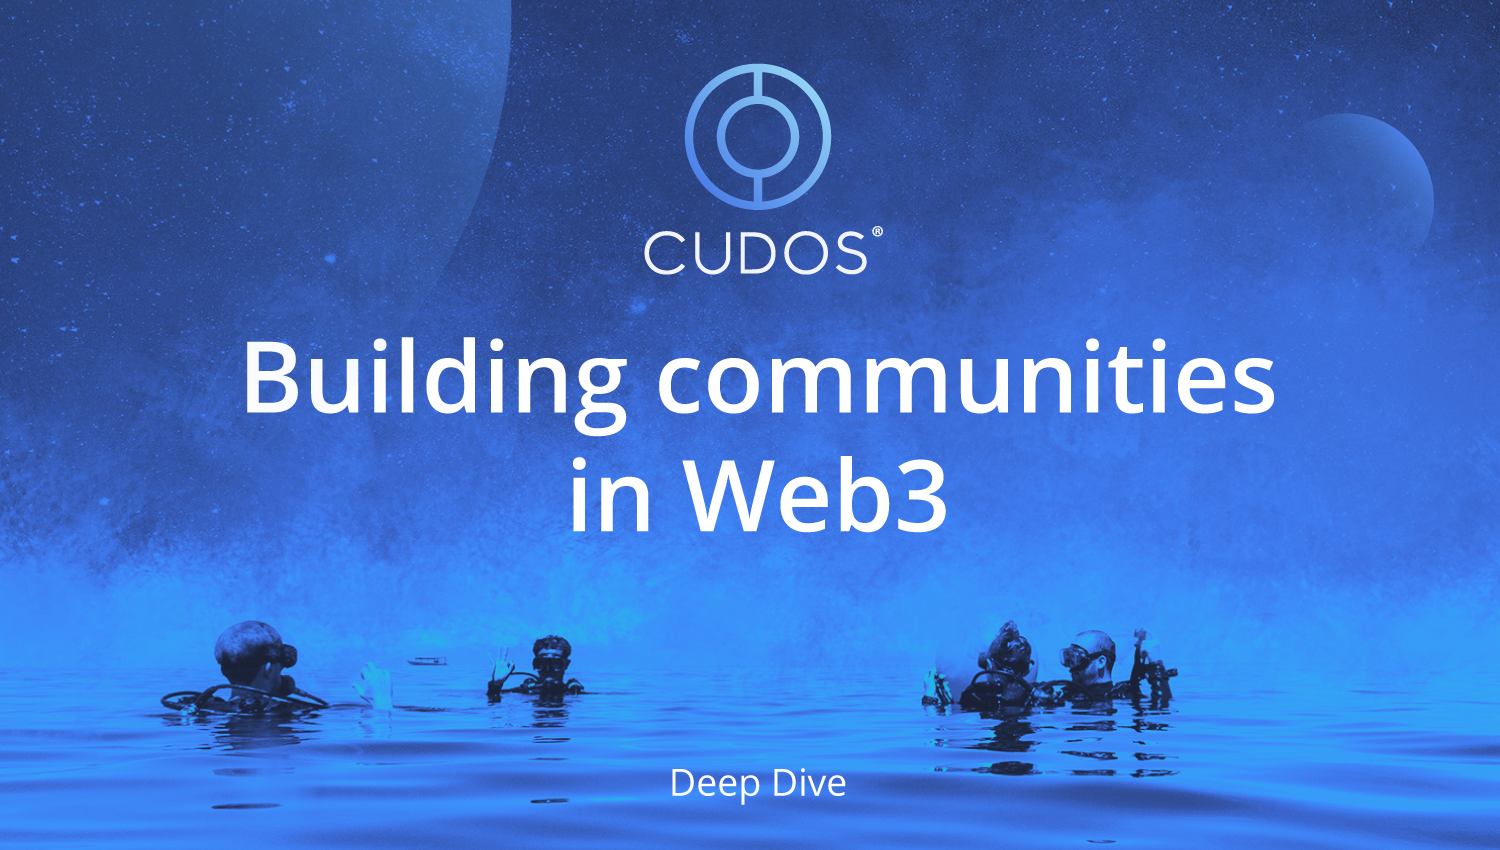 The power and value of building Web3 communities